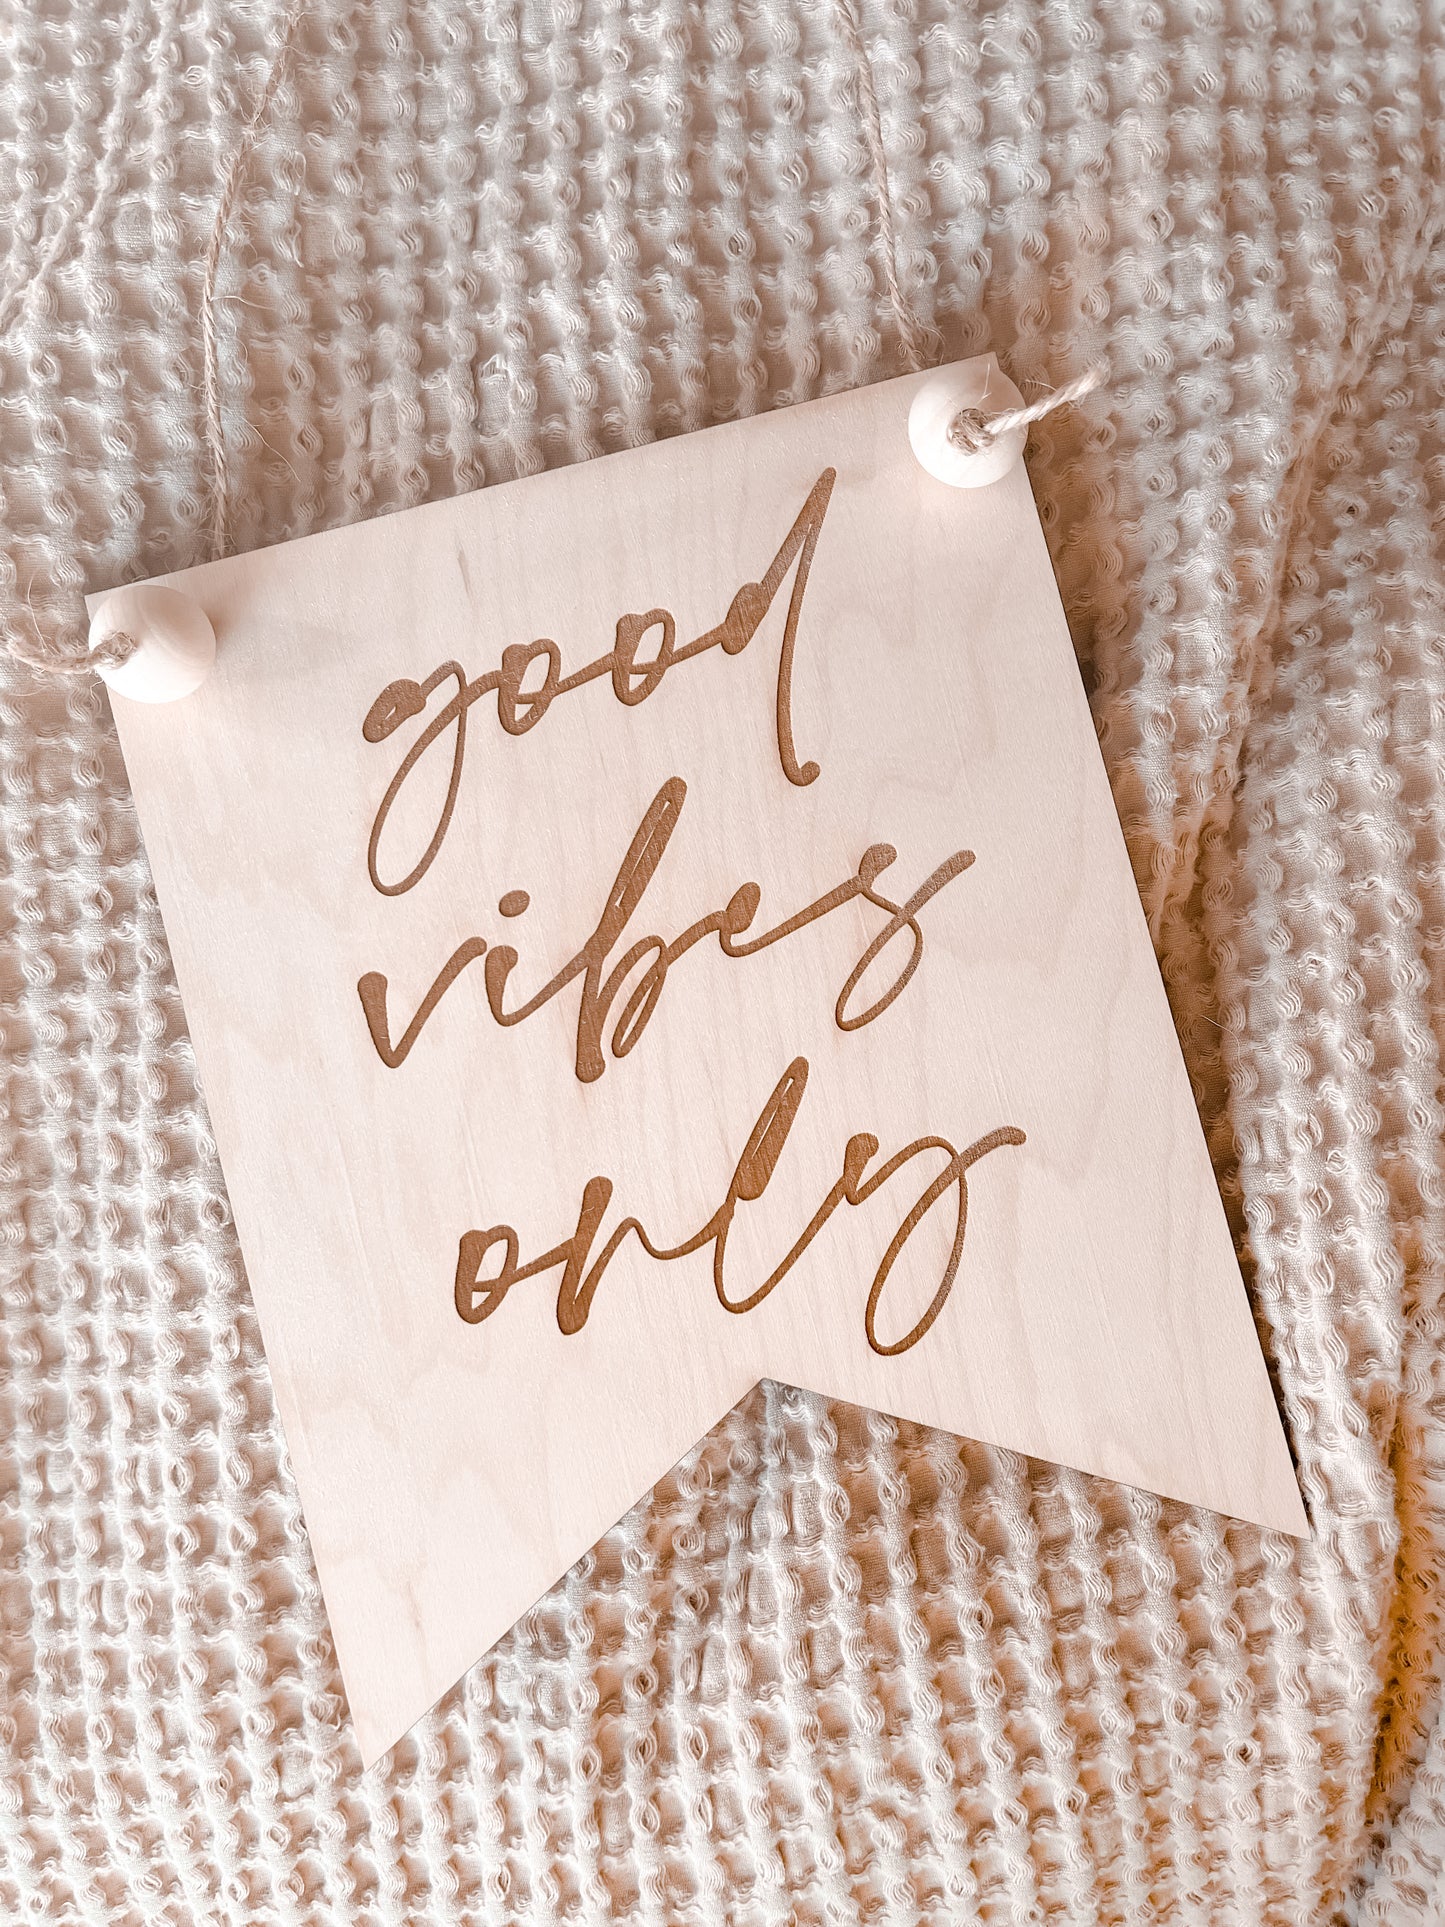 Good Vibes Only Engraved Wood Pennant